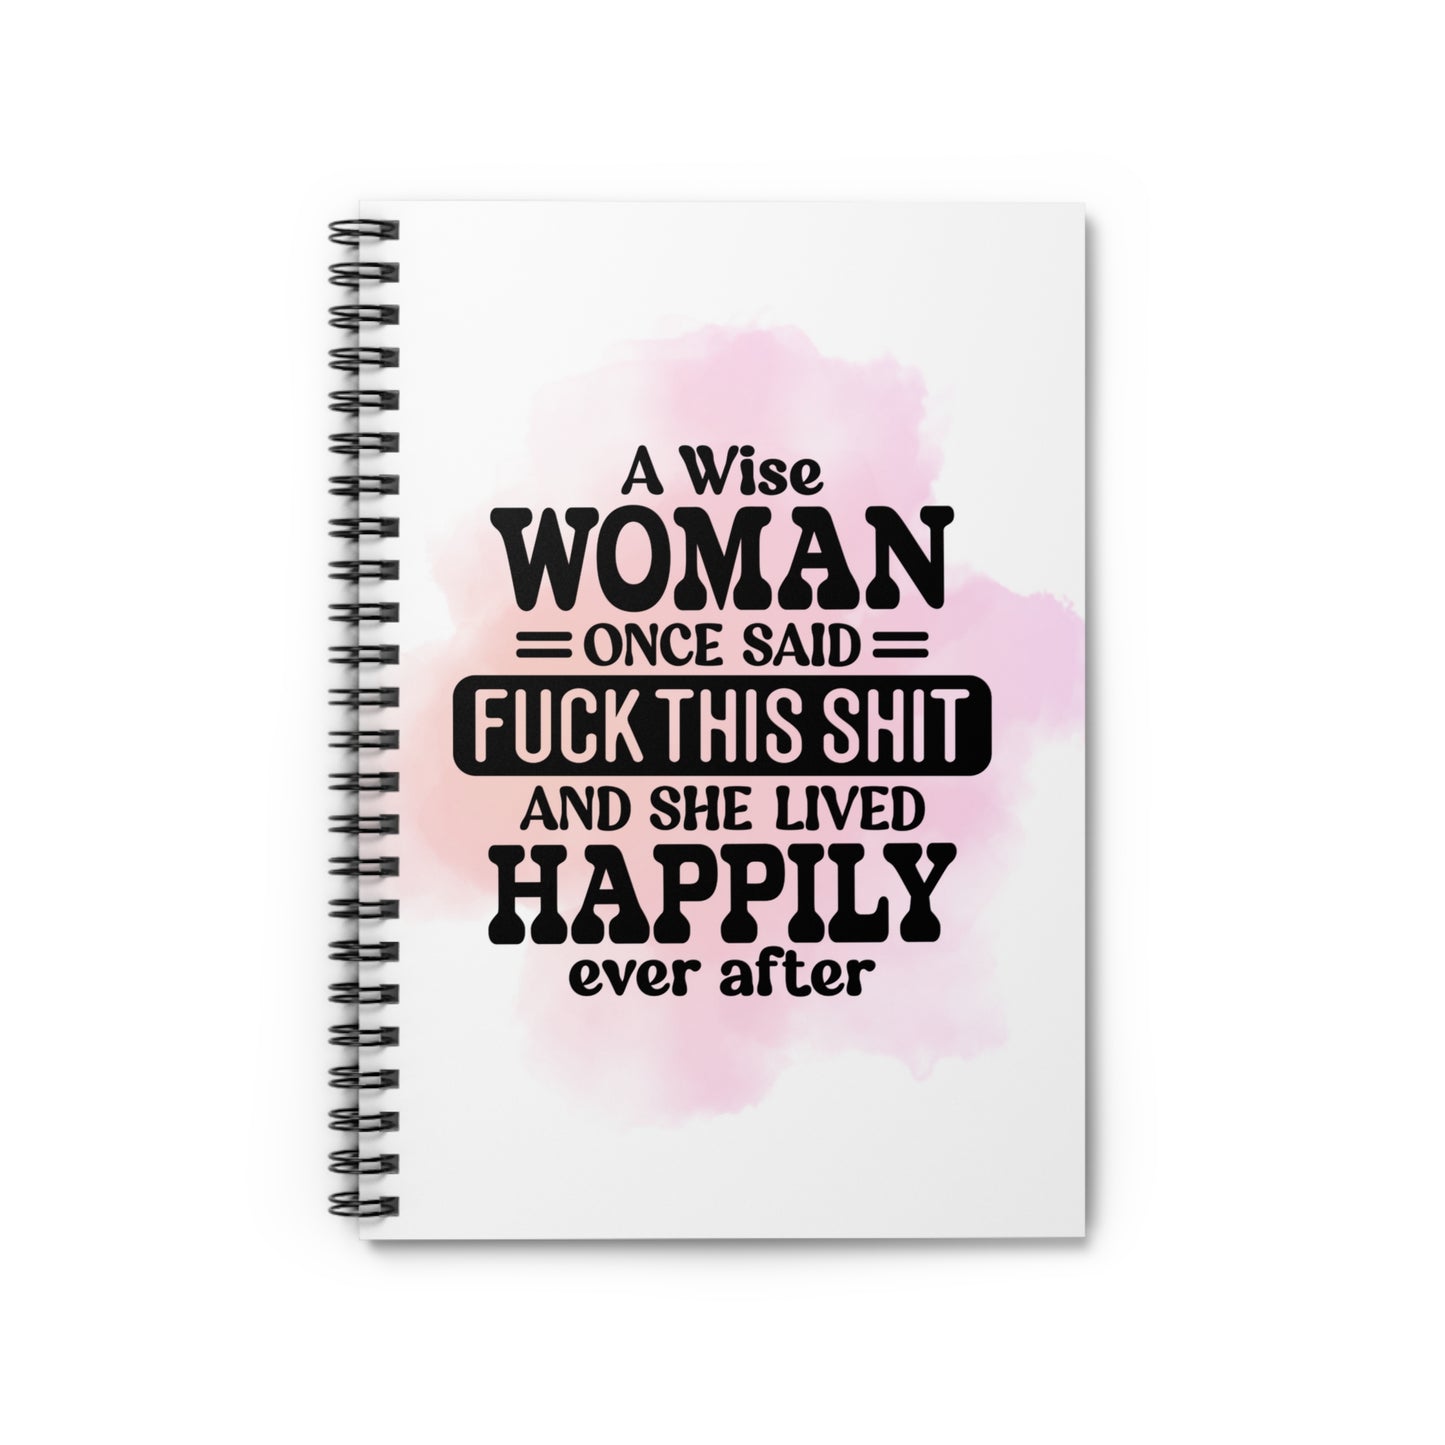 Fuck this Shit | Pink Spiral Notebook